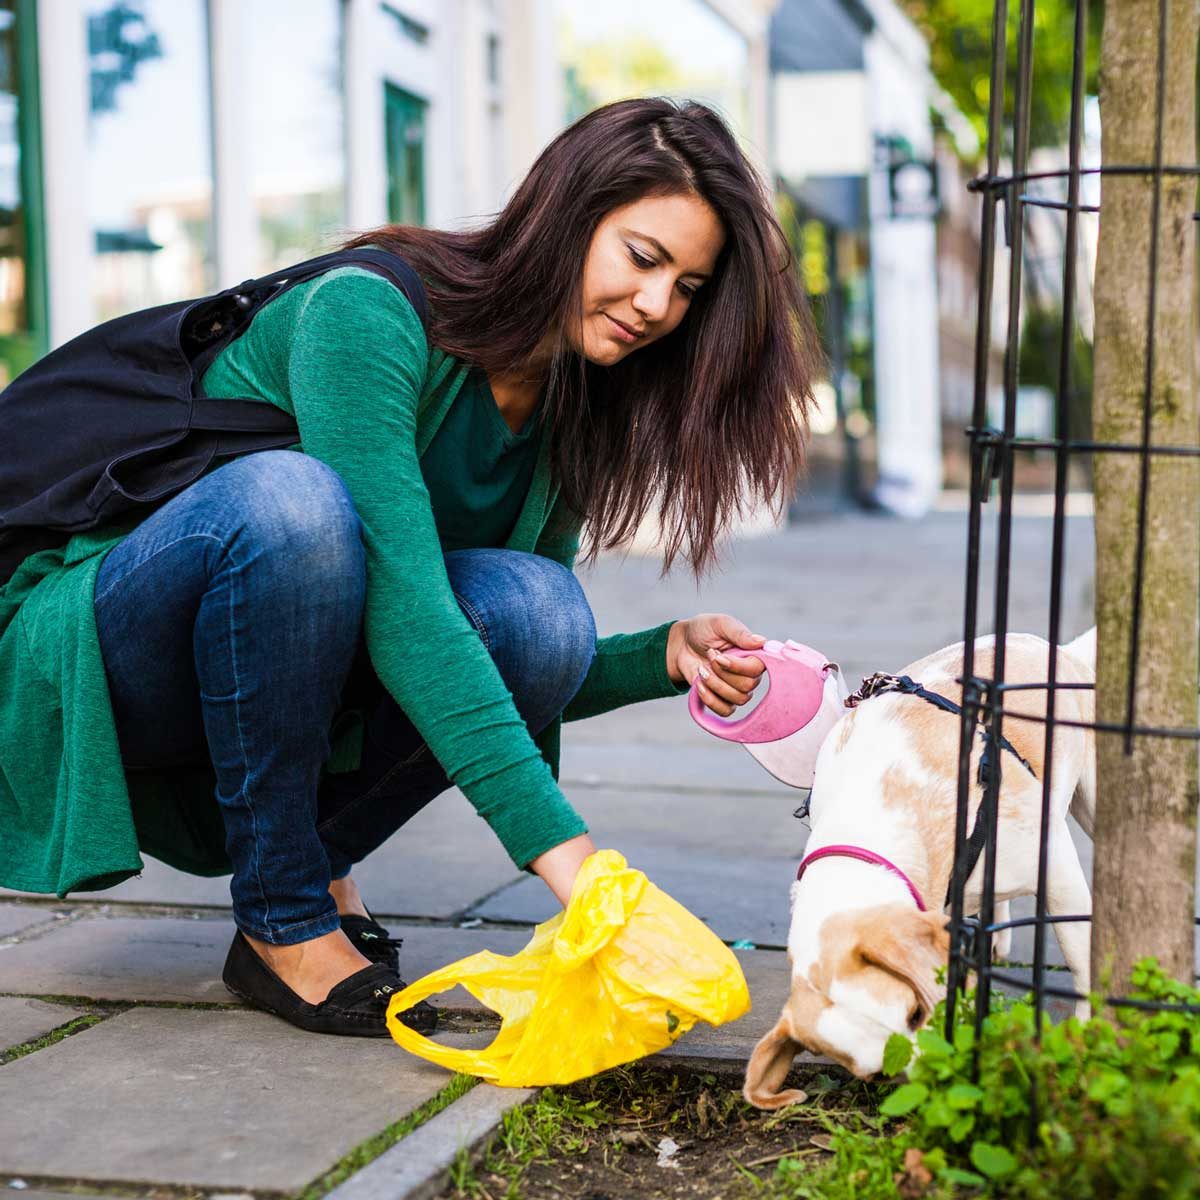 How to Clean Up Dog Poop in 8 Easy Ways